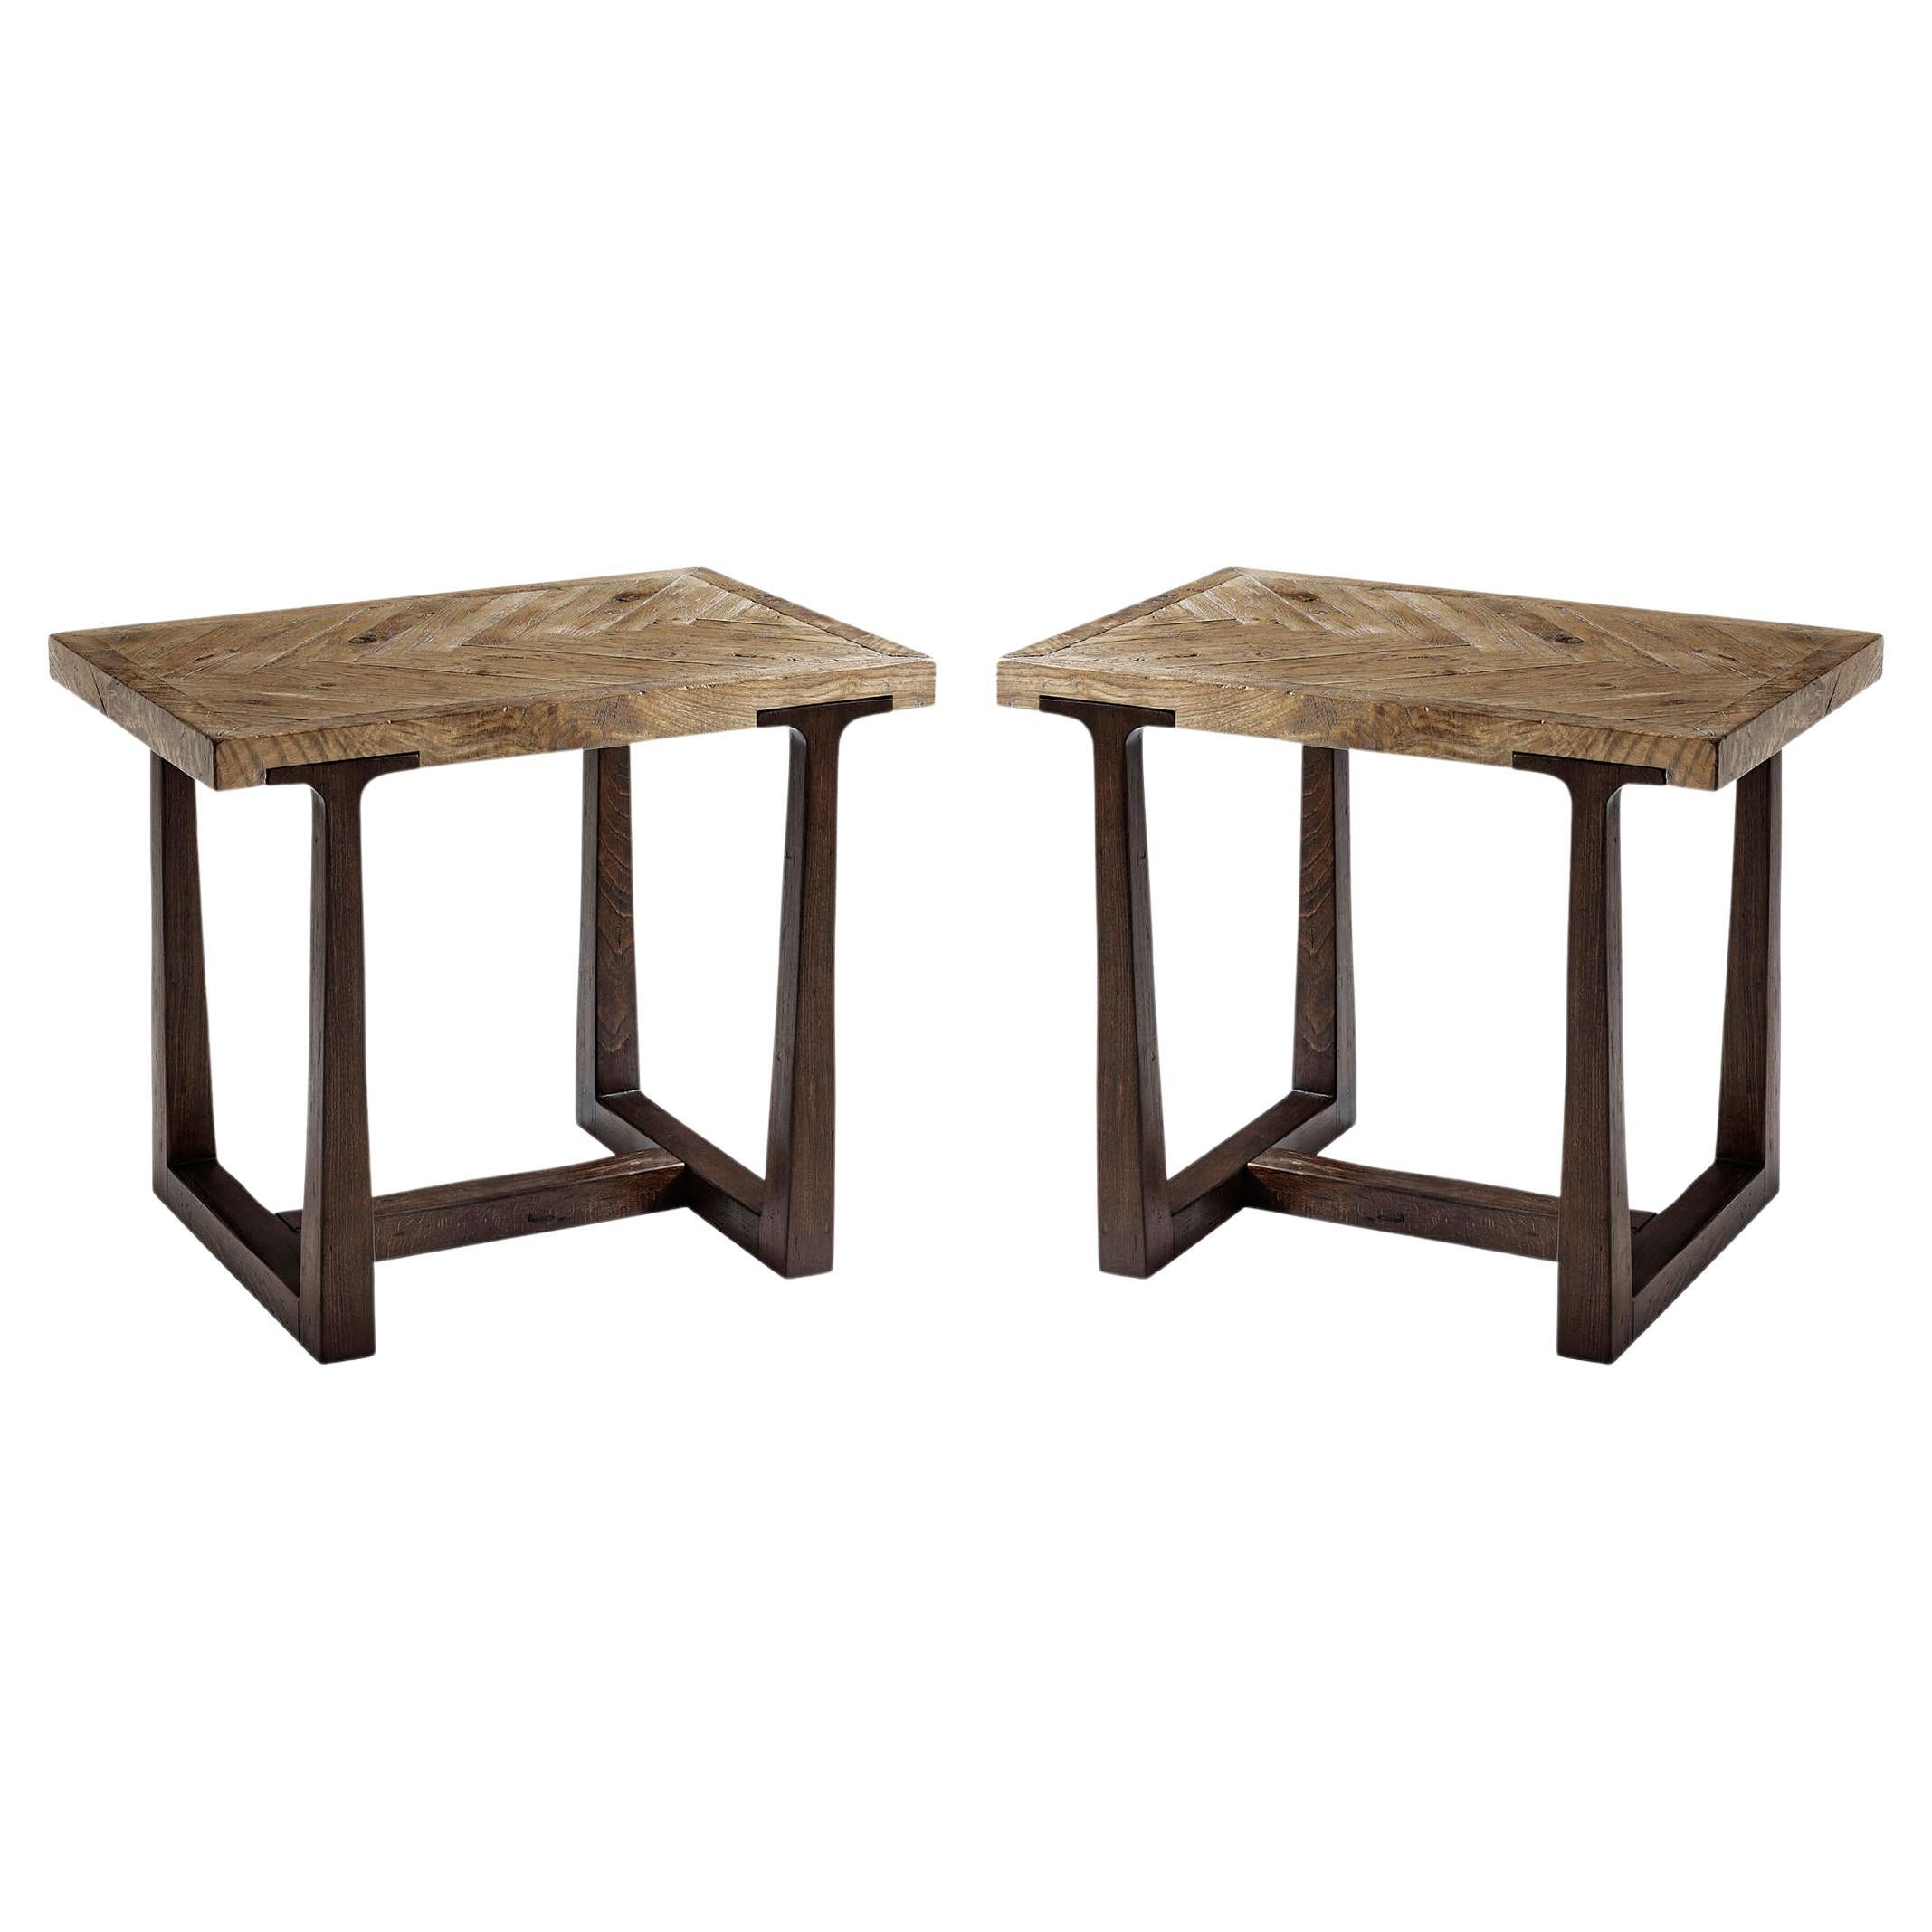 Pair of Chevron Oak Parquetry Side Tables